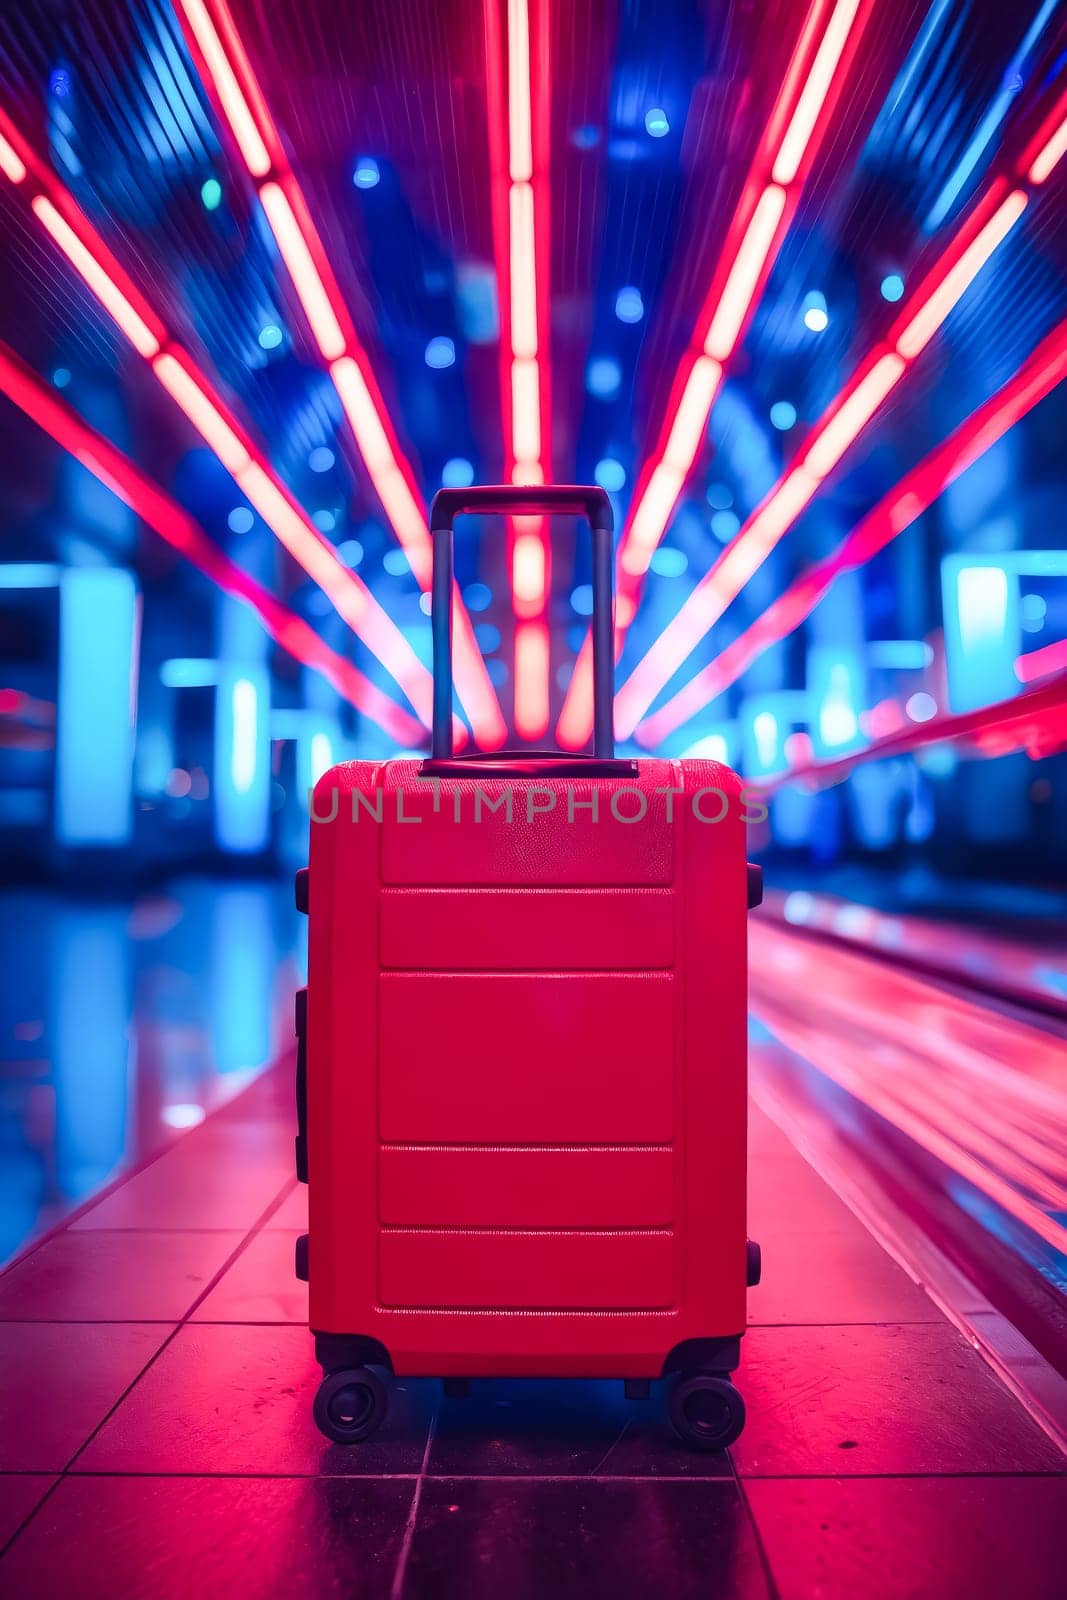 A red suitcase is sitting on a tiled floor in front of a bright red wall. The suitcase is open and the handle is visible. The scene has a vibrant and energetic feel, with the bright red wall. Generative AI